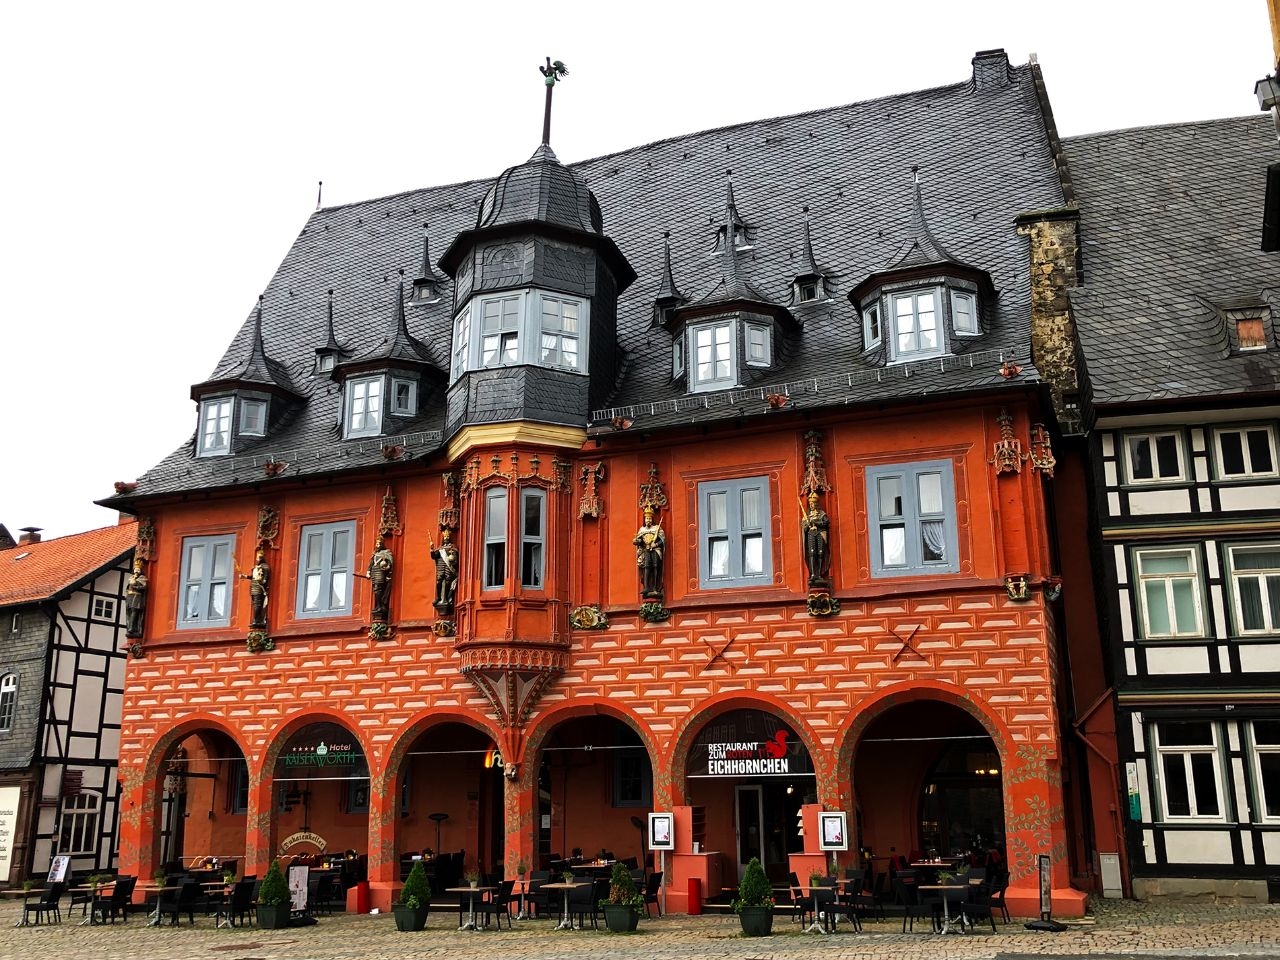 Historic Town of Goslar - the quintessence of Germany